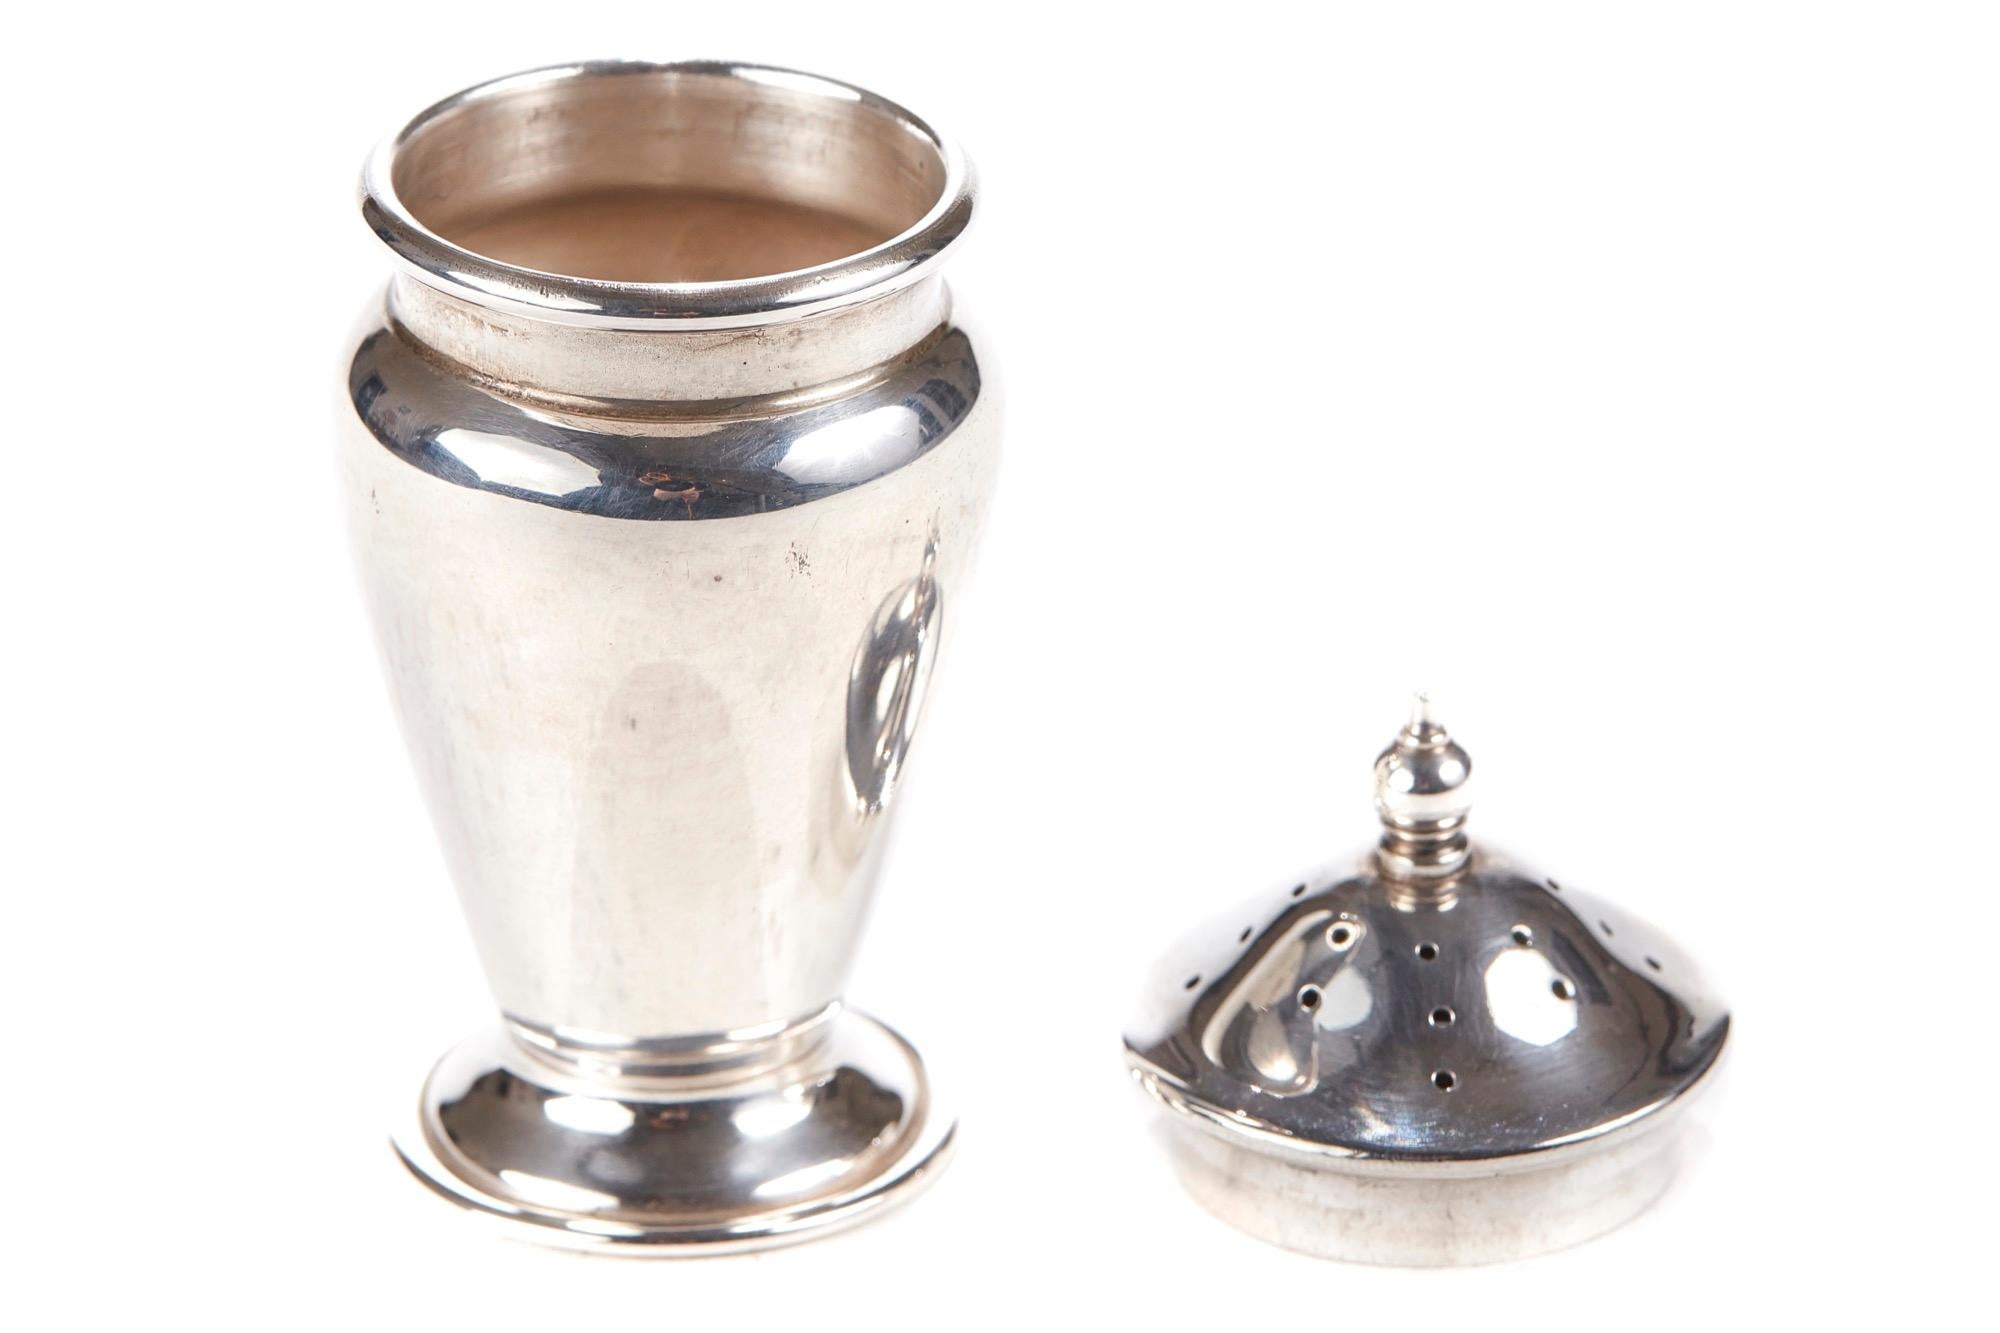 Offered for sale is this solid silver pepperette with lift off lid. Lovely shaped item. It is in perfect condition.